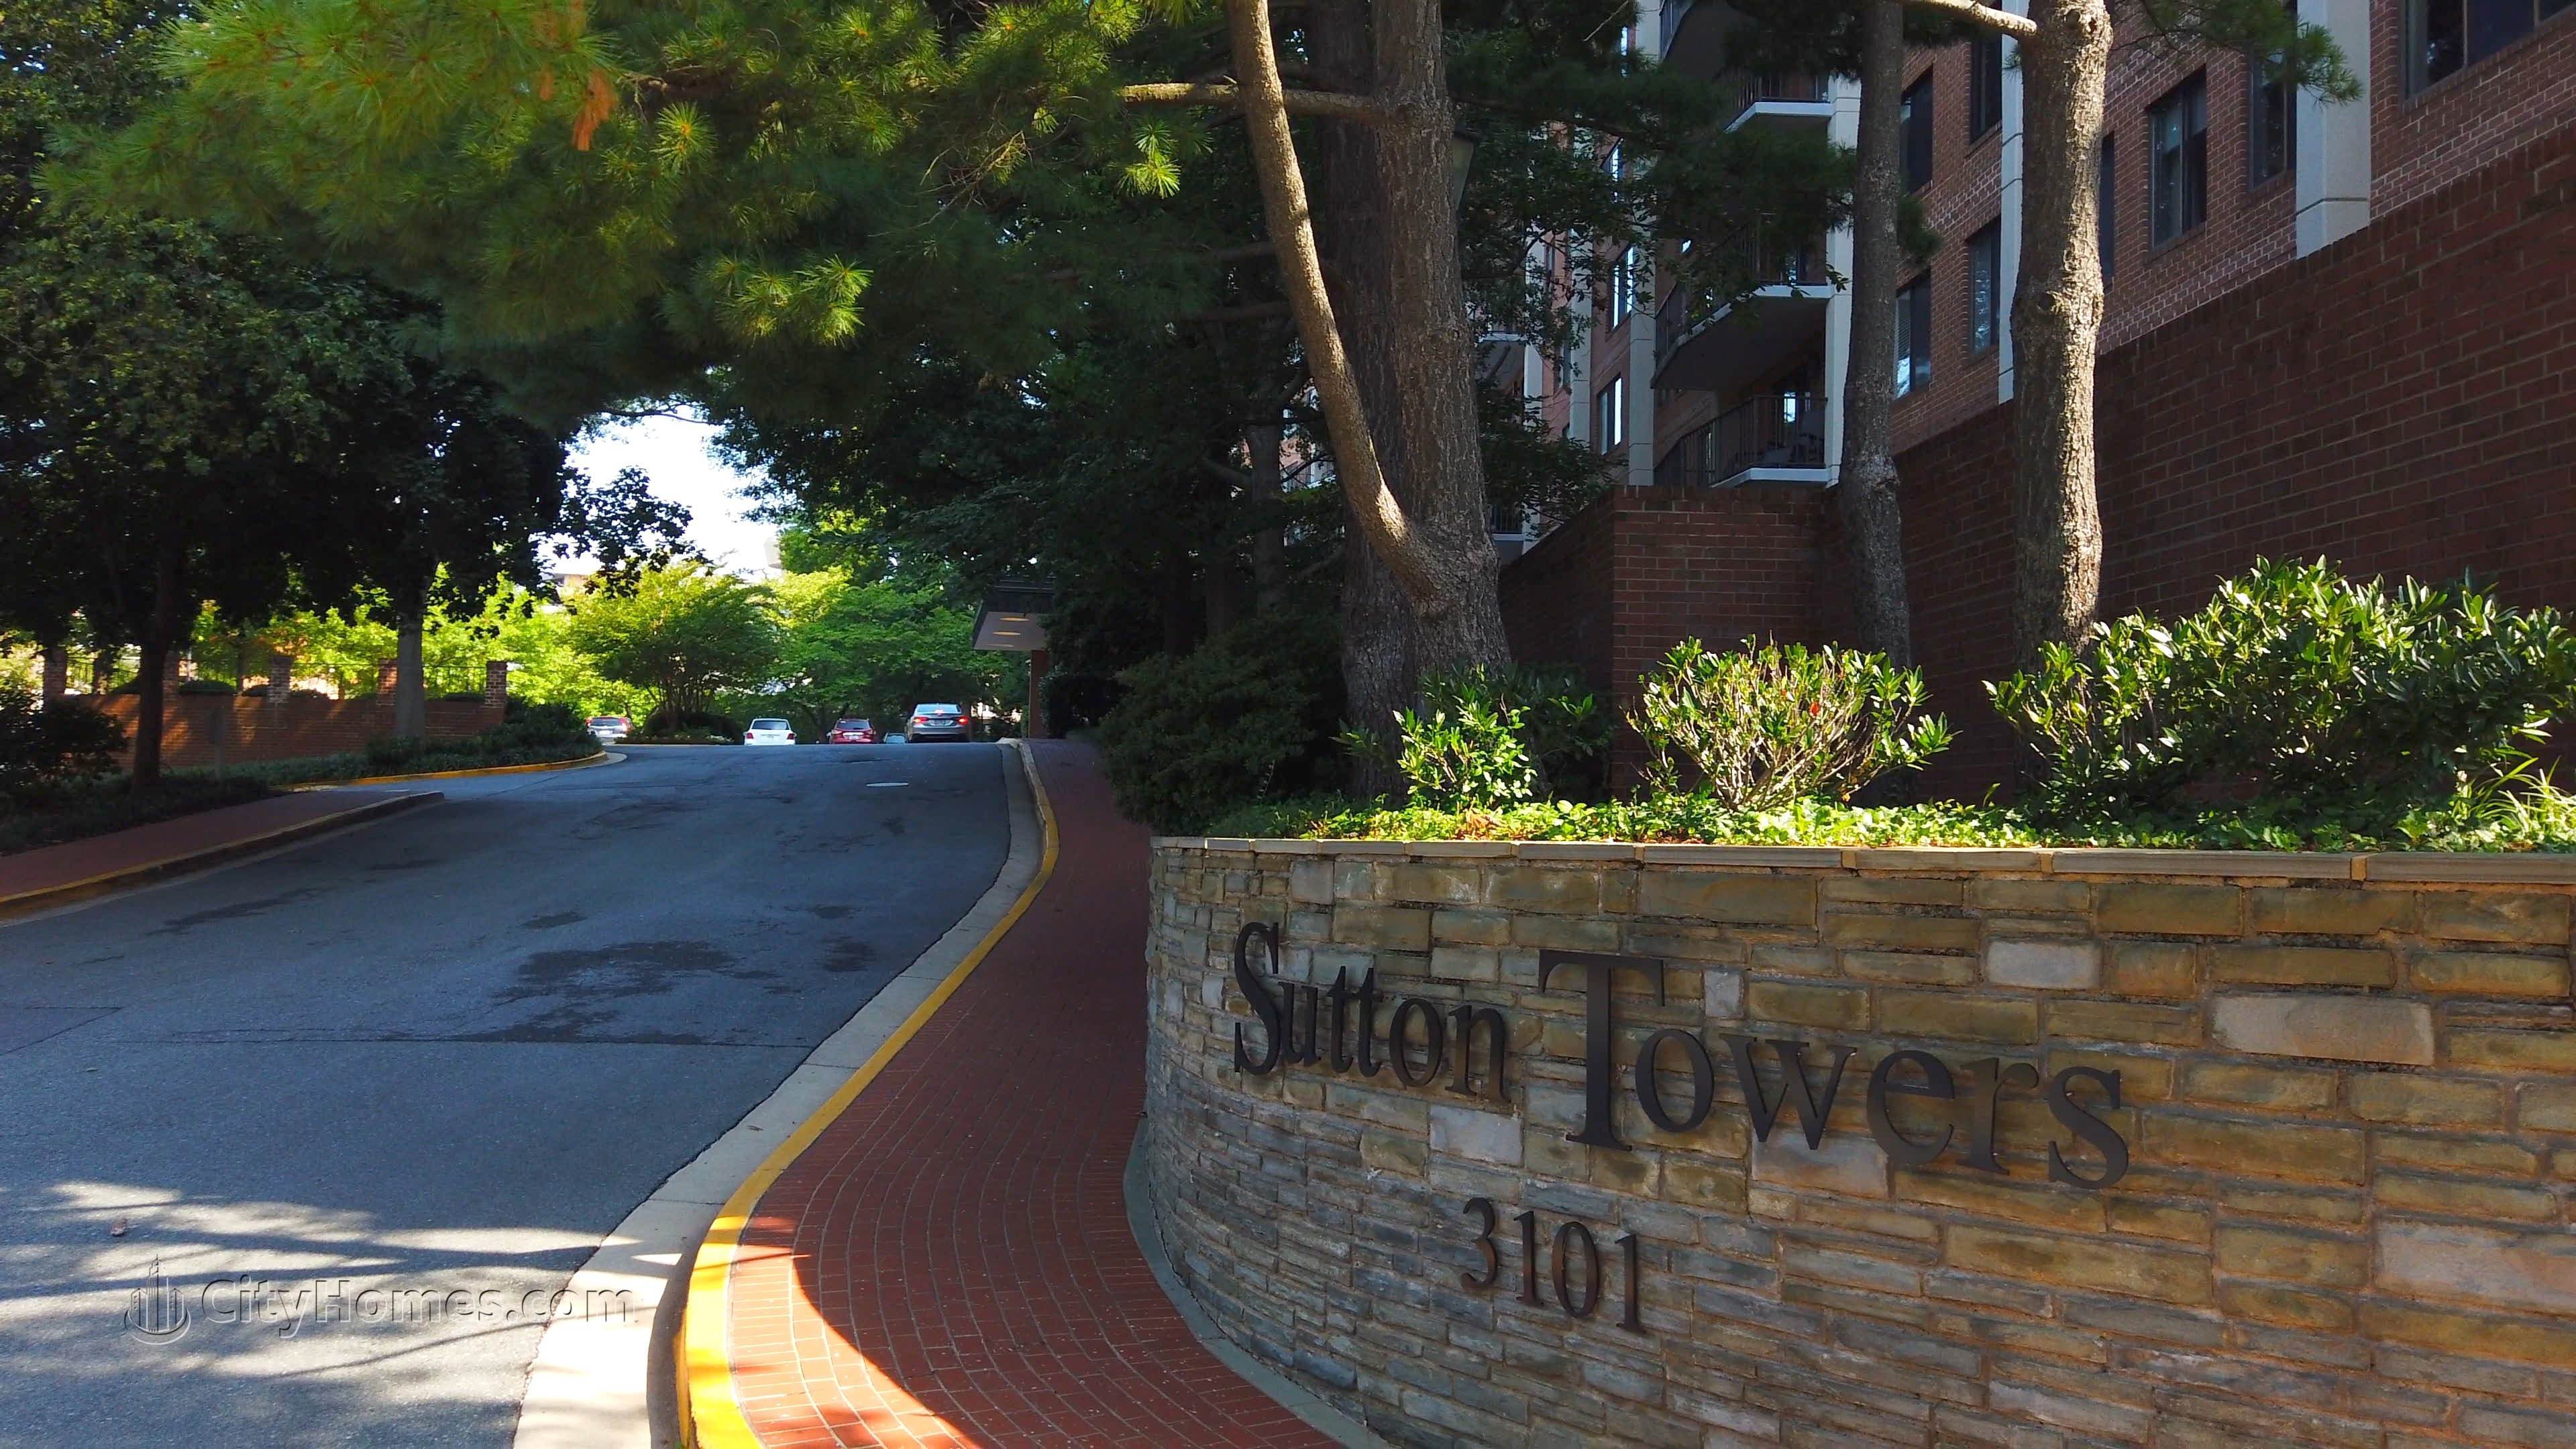 Sutton Towers prédio em 3101 New Mexico Ave NW, Wesley Heights, Washington, DC 20016